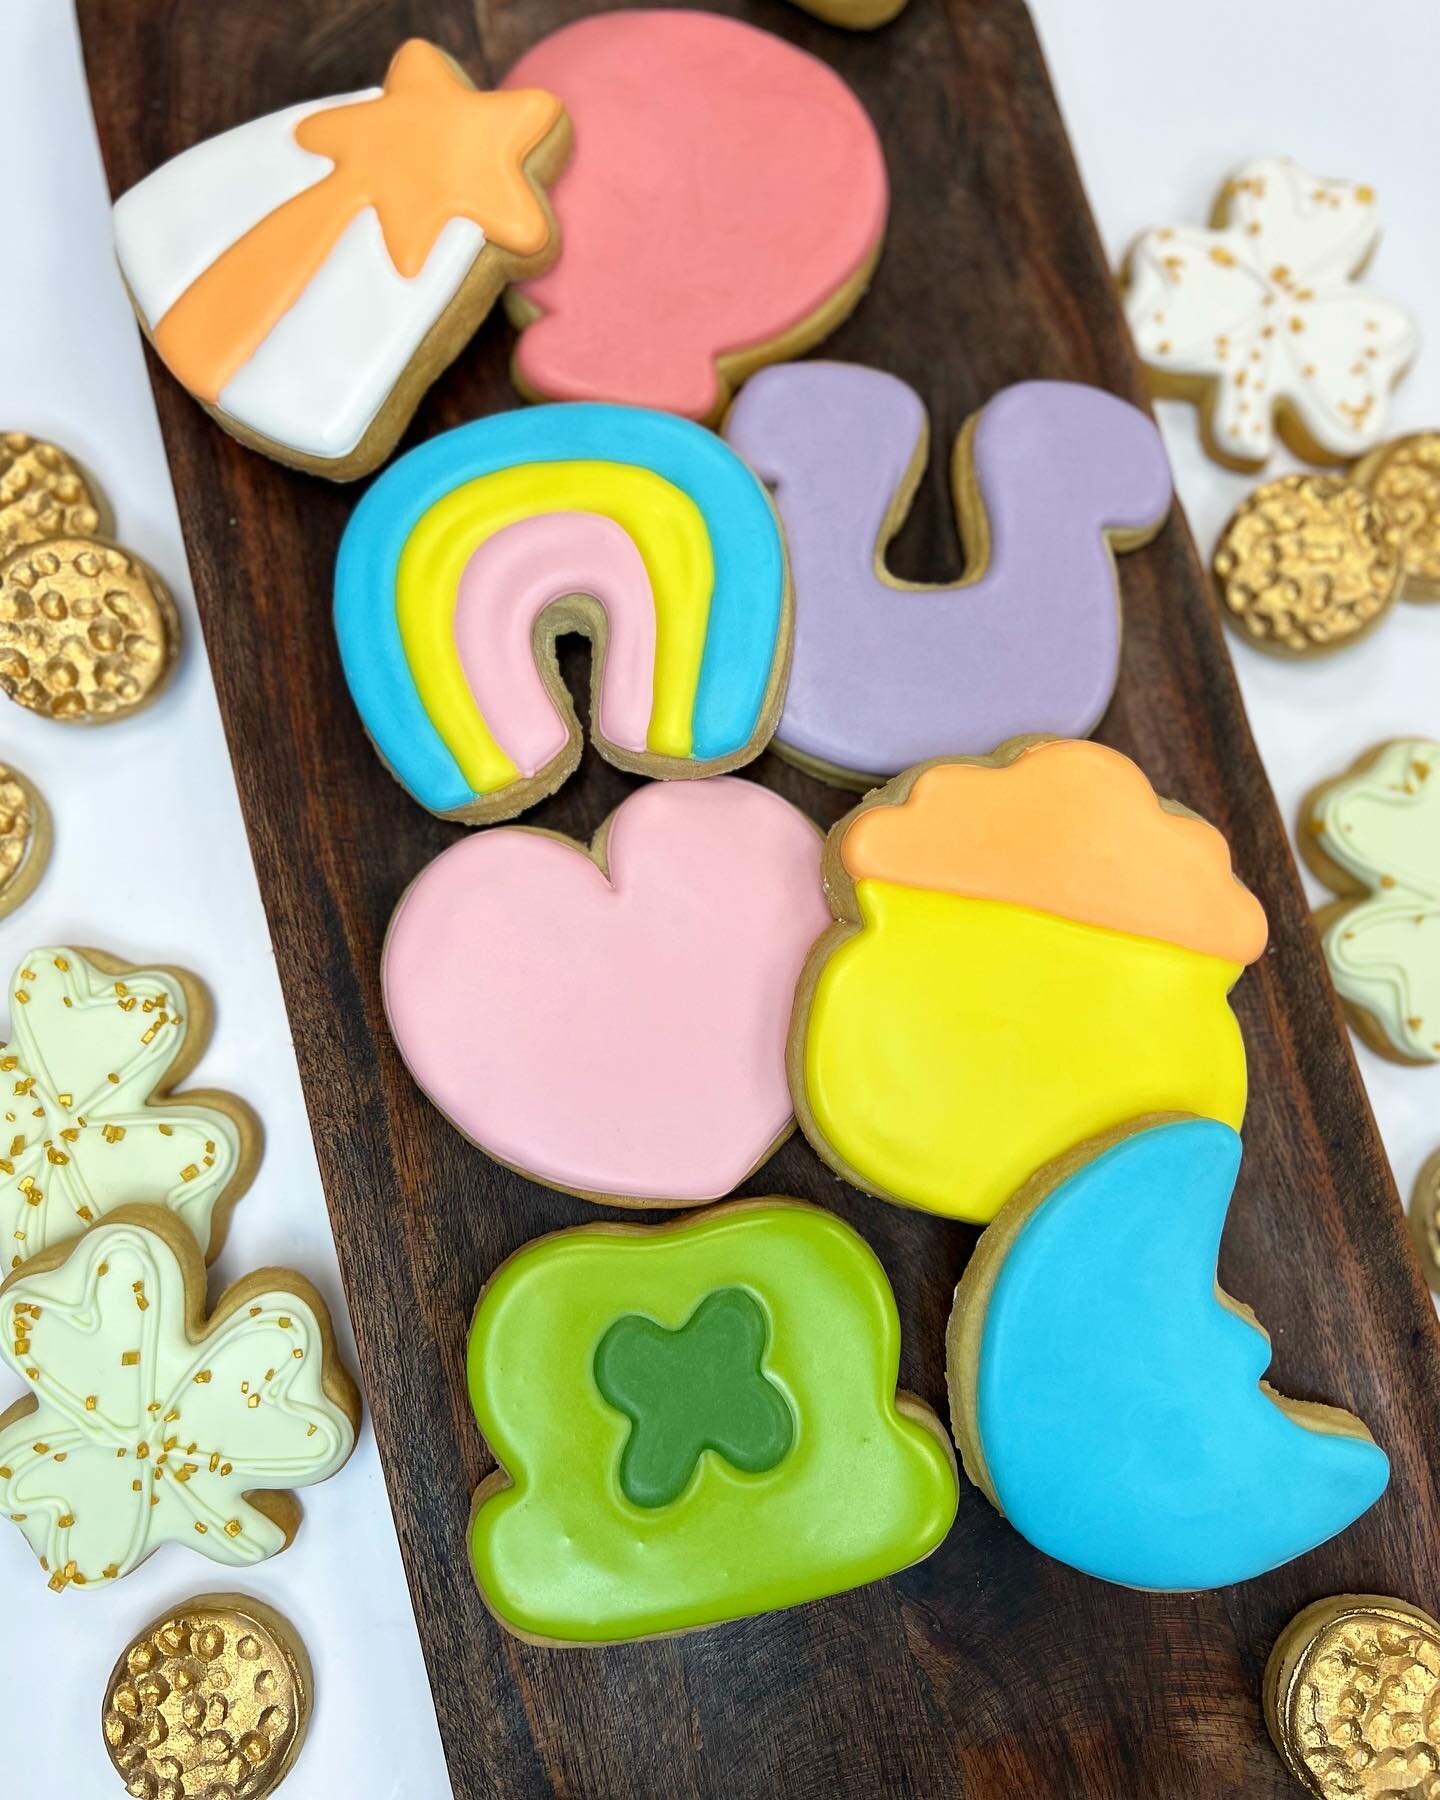 St. Patrick's Day sweets are live on our website! Pre order today for school, work, family, friends or treat your self because you deserve it💚

#stpatricksday #cookies #lucky #luckycharms #marshmallows #buffalo #buffalony #buffalobakery #buffalofood